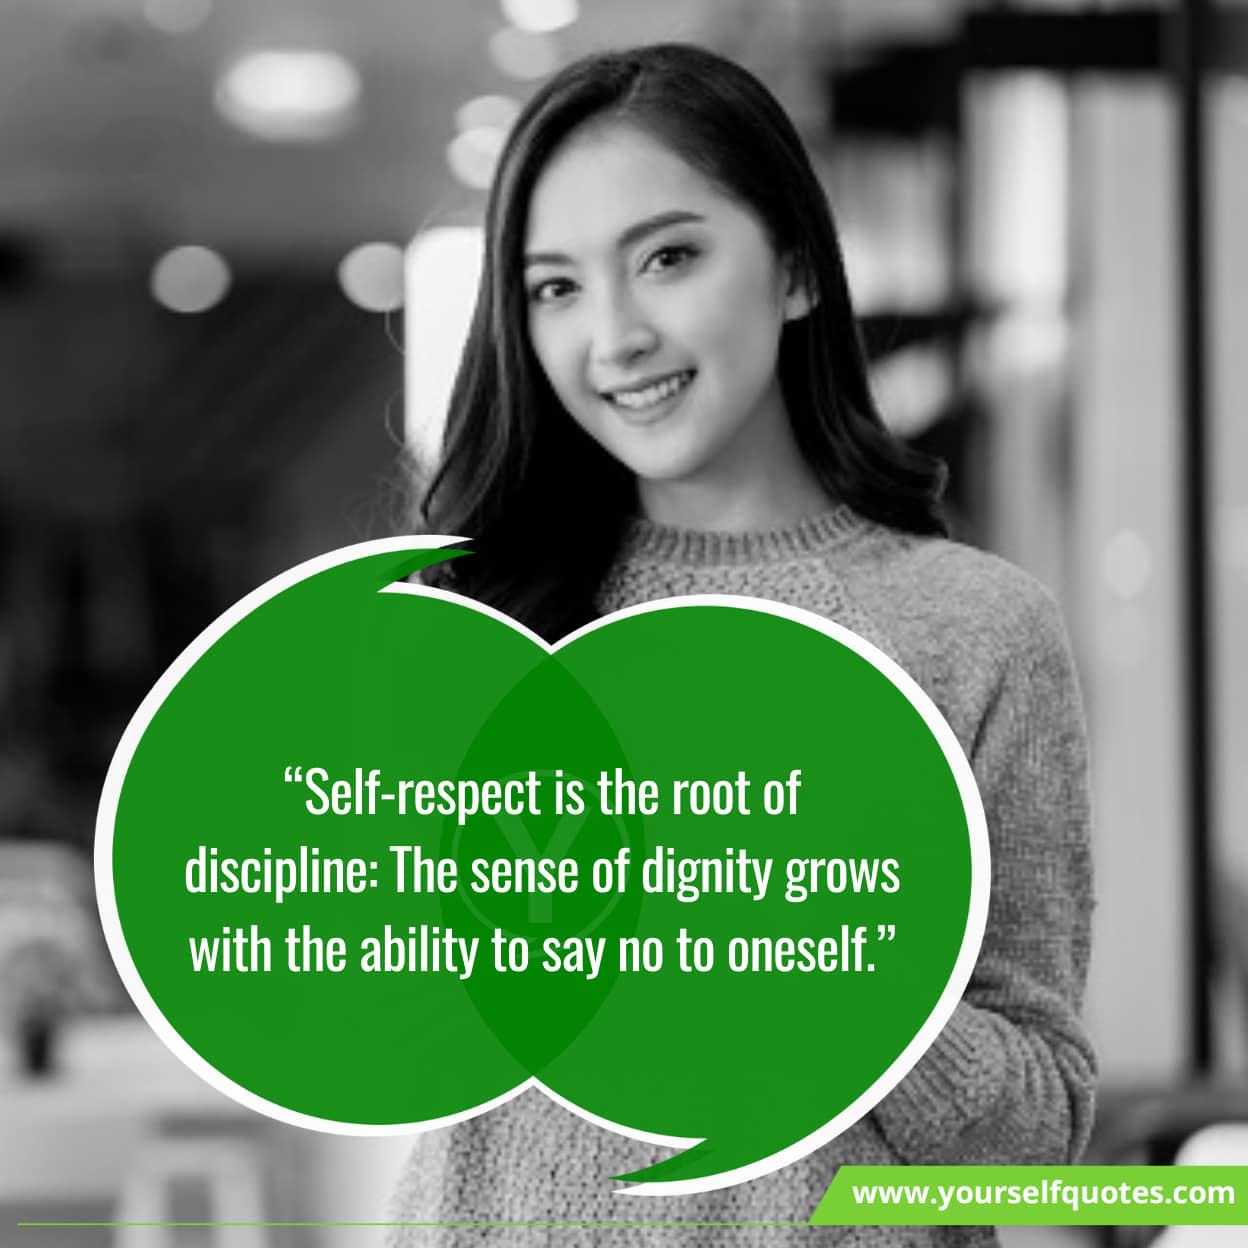 Best Self-Respect Quotes For Relationship